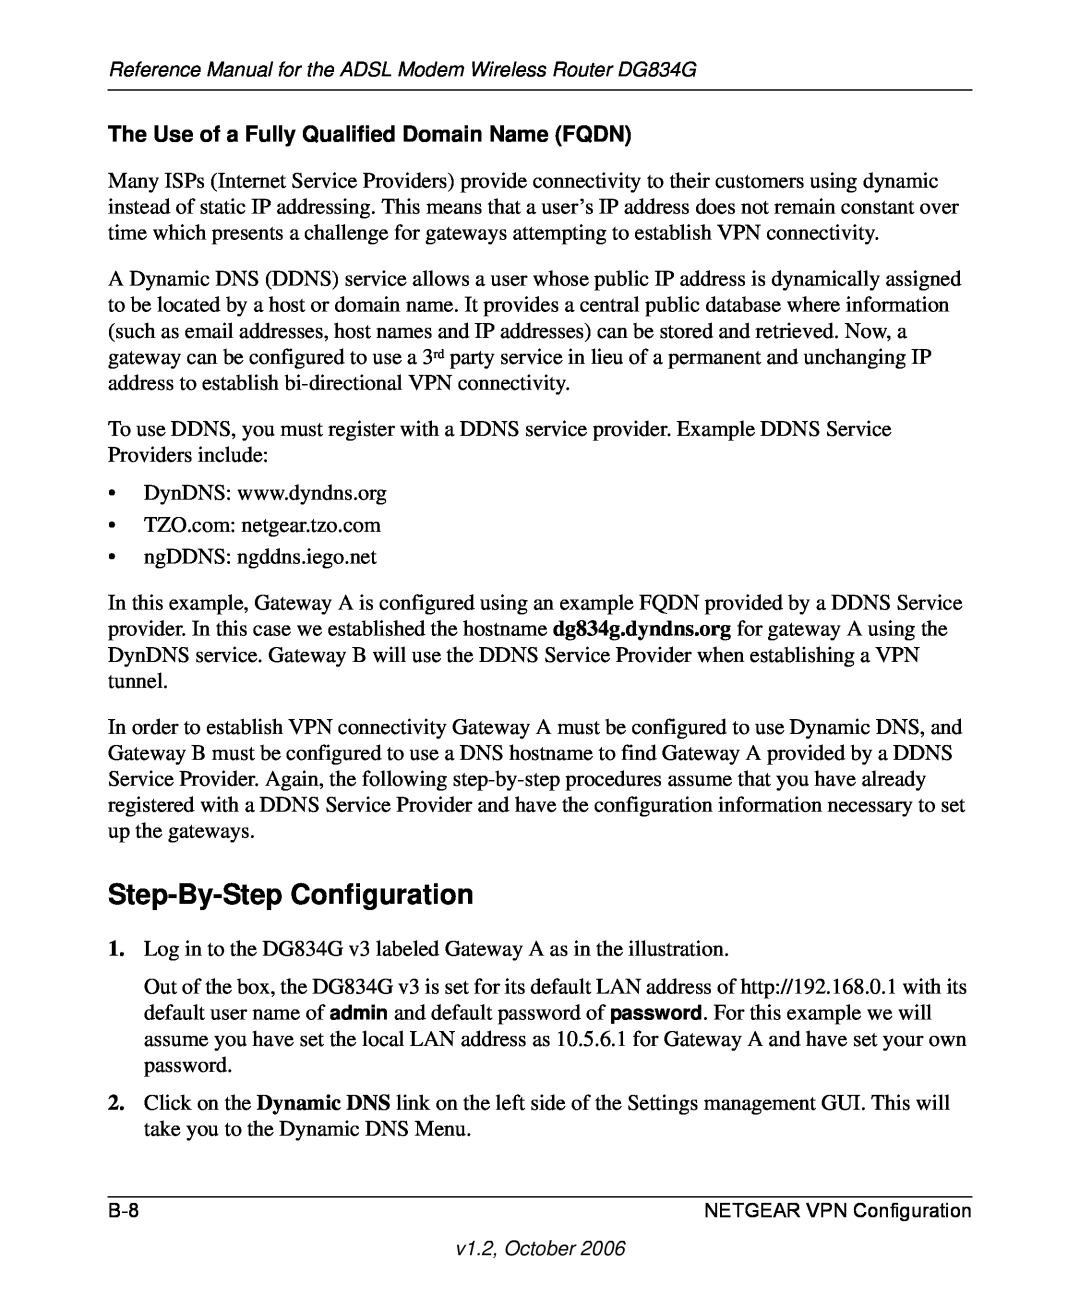 NETGEAR DG834G manual Step-By-Step Configuration, The Use of a Fully Qualified Domain Name FQDN 